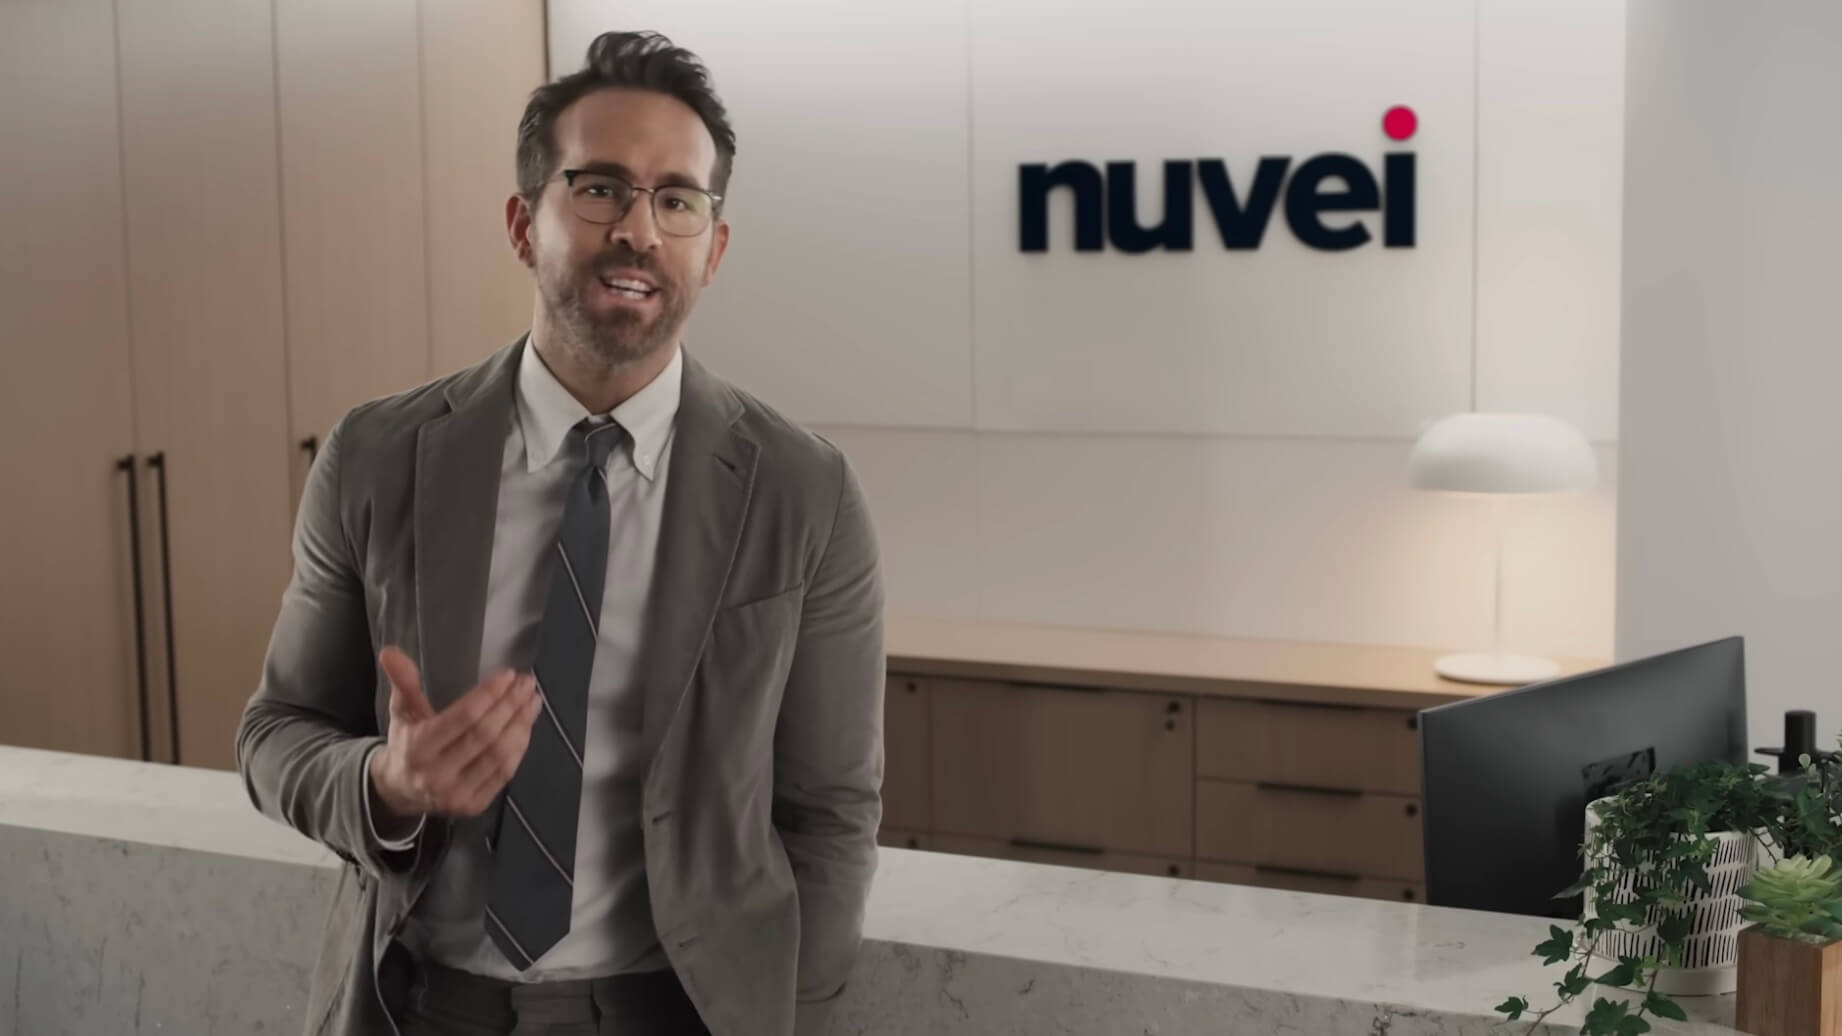 Nuvei, backed by celebrity figure Ryan Reynolds, is currently in advanced negotiations with private-equity giant Advent International. 

Image Source: Nuvei 